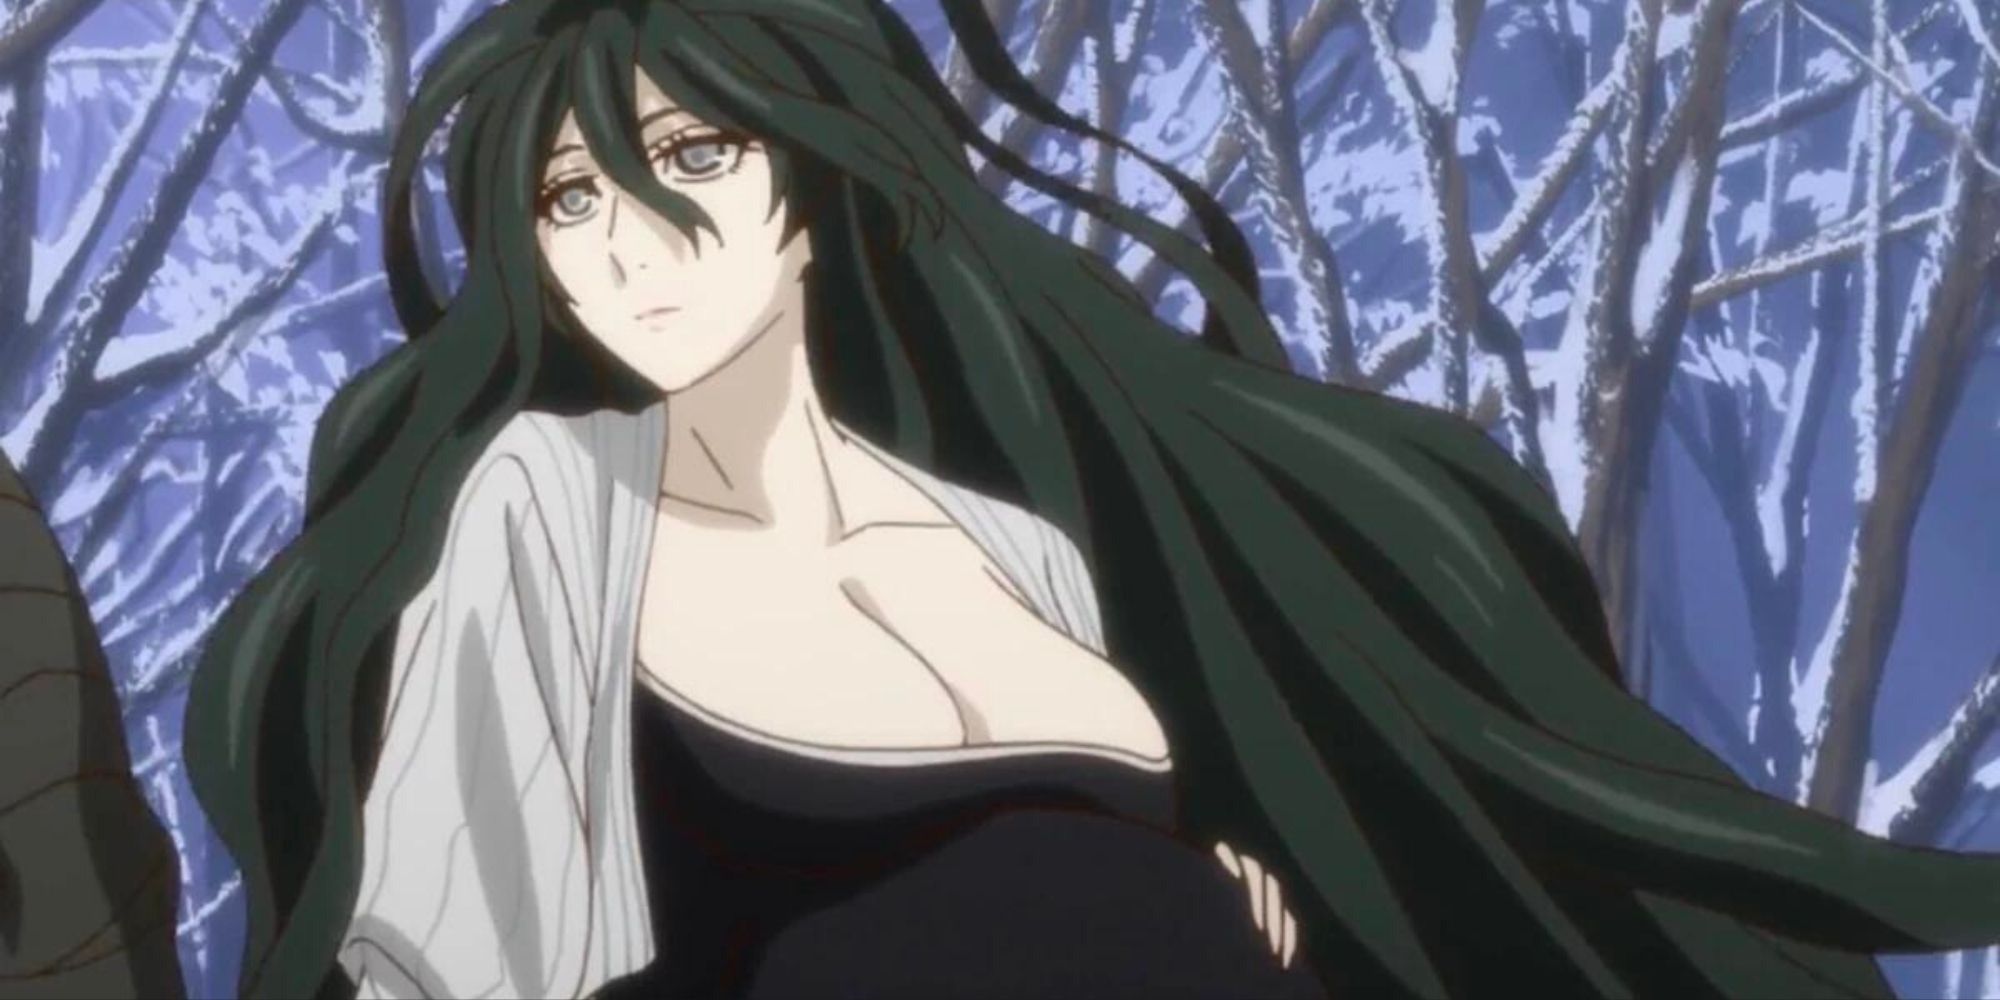 Morrigan in the ancient magus bride